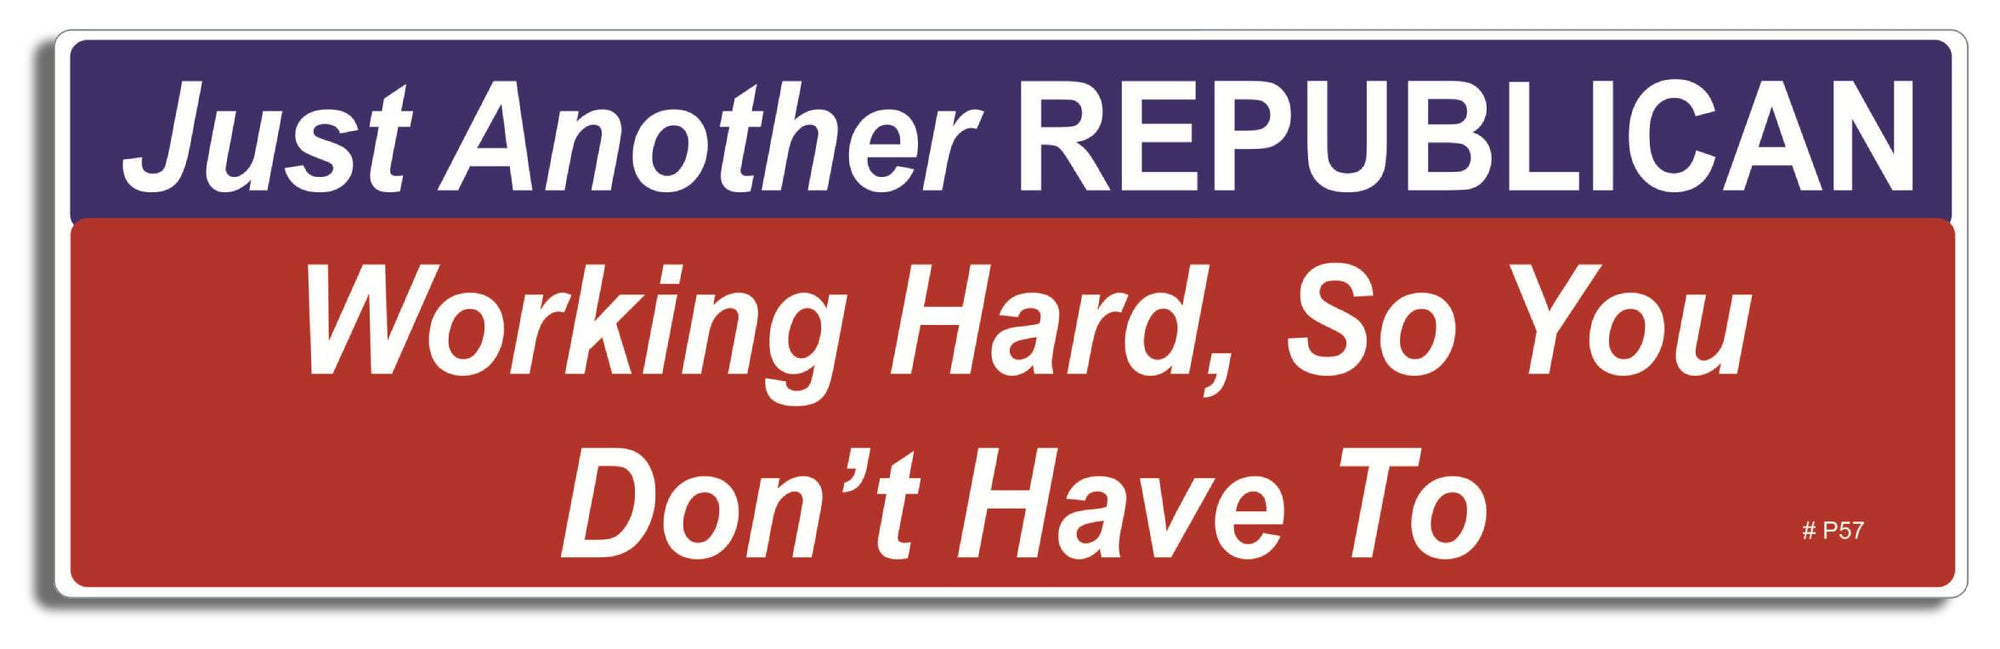 Just another Republican working so you don't have to - 3" x 10" Bumper Sticker--Car Magnet- -  Decal Bumper Sticker-political Bumper Sticker Car Magnet Just another Republican working so-  Decal for carsconservative, Politics, republican, trump election